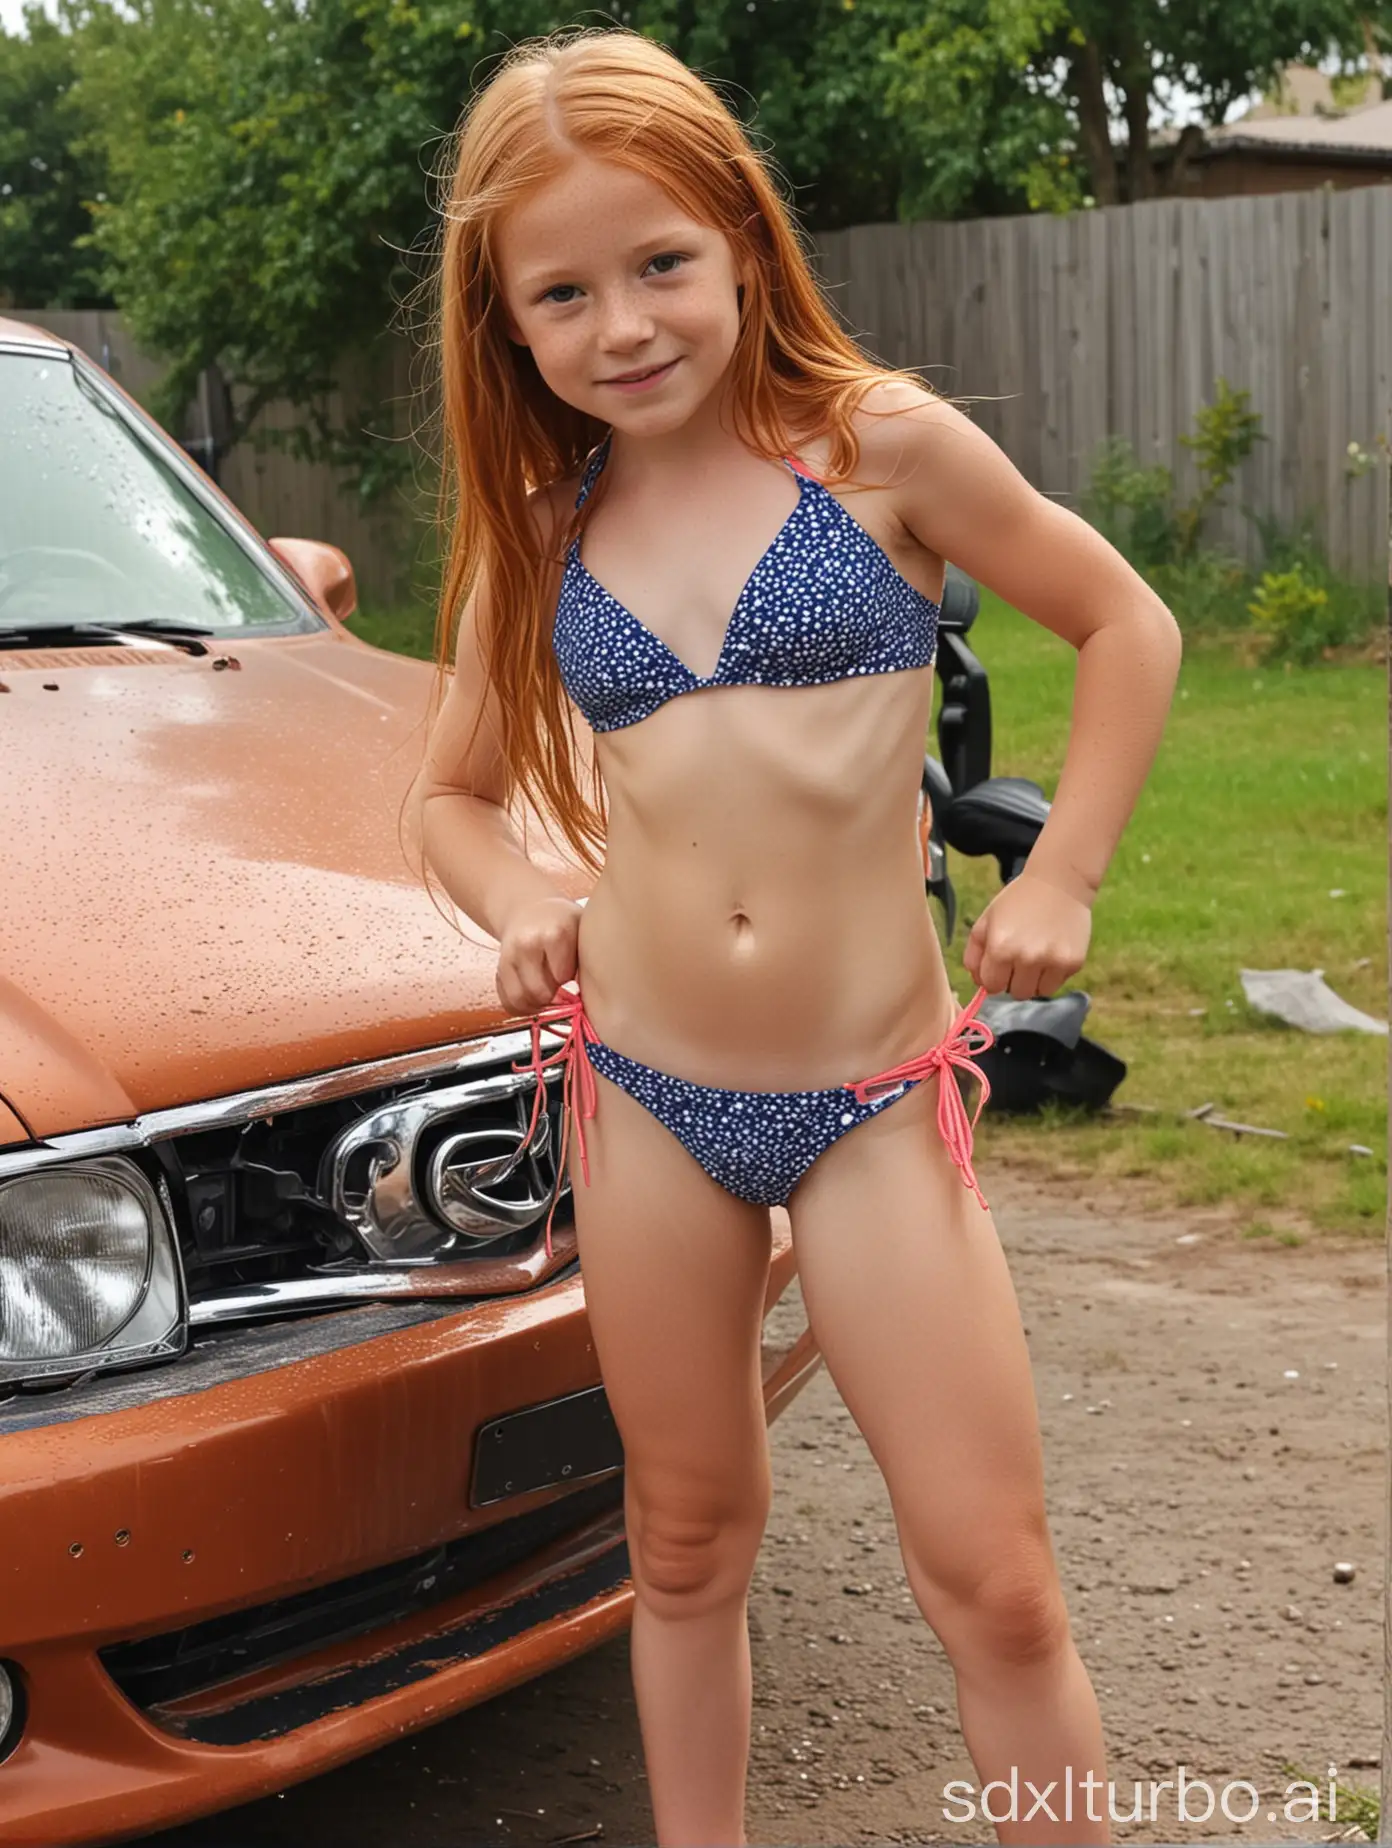 7 years old girl, long ginger hair, flat chested, extra muscular abs, show belly, string bikini, washing cars